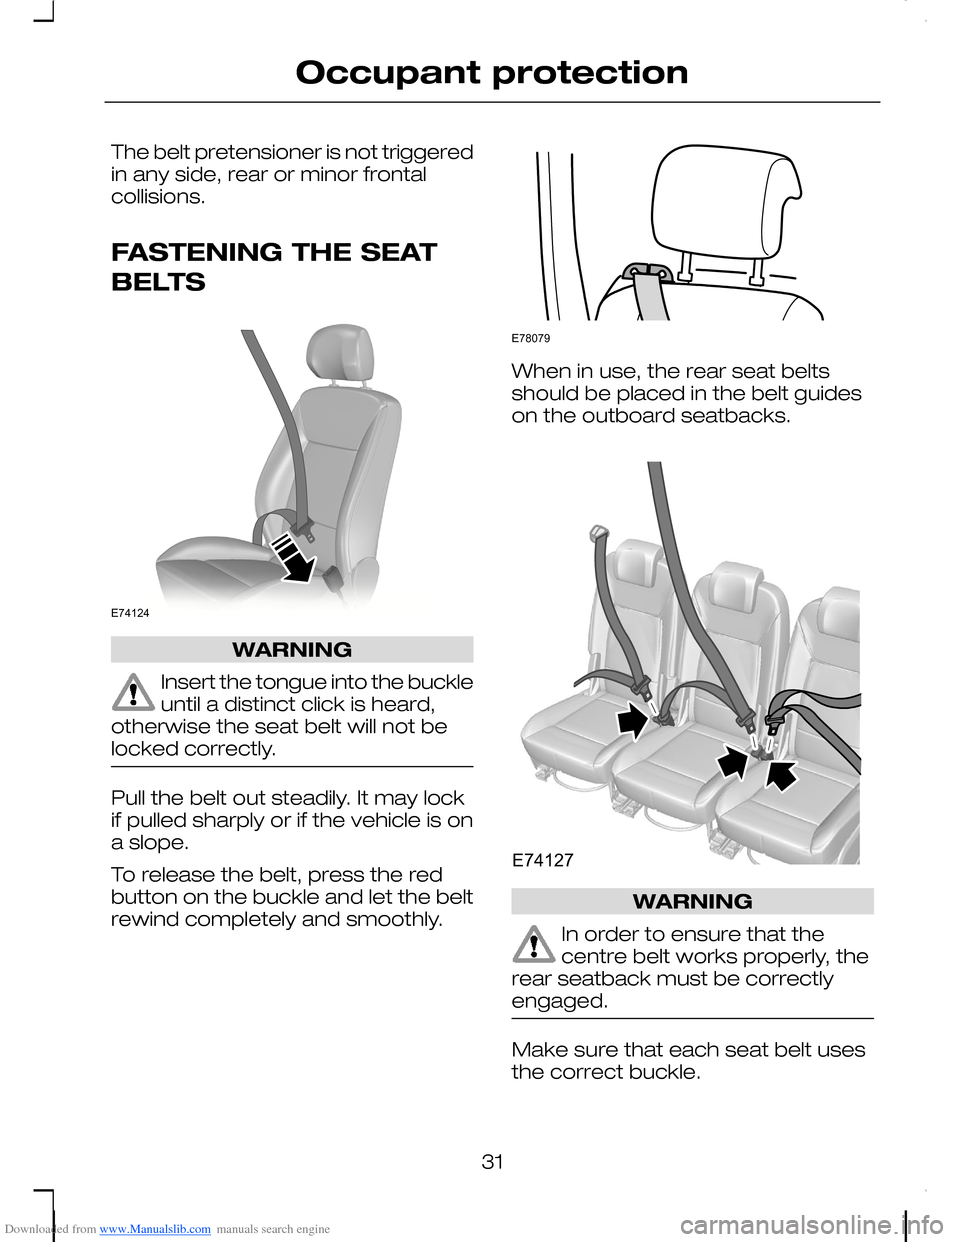 FORD C MAX 2008 1.G User Guide Downloaded from www.Manualslib.com manuals search engine The belt pretensioner is not triggeredin any side, rear or minor frontalcollisions.
FASTENING THE SEAT
BELTS
WARNING
Insert the tongue into the